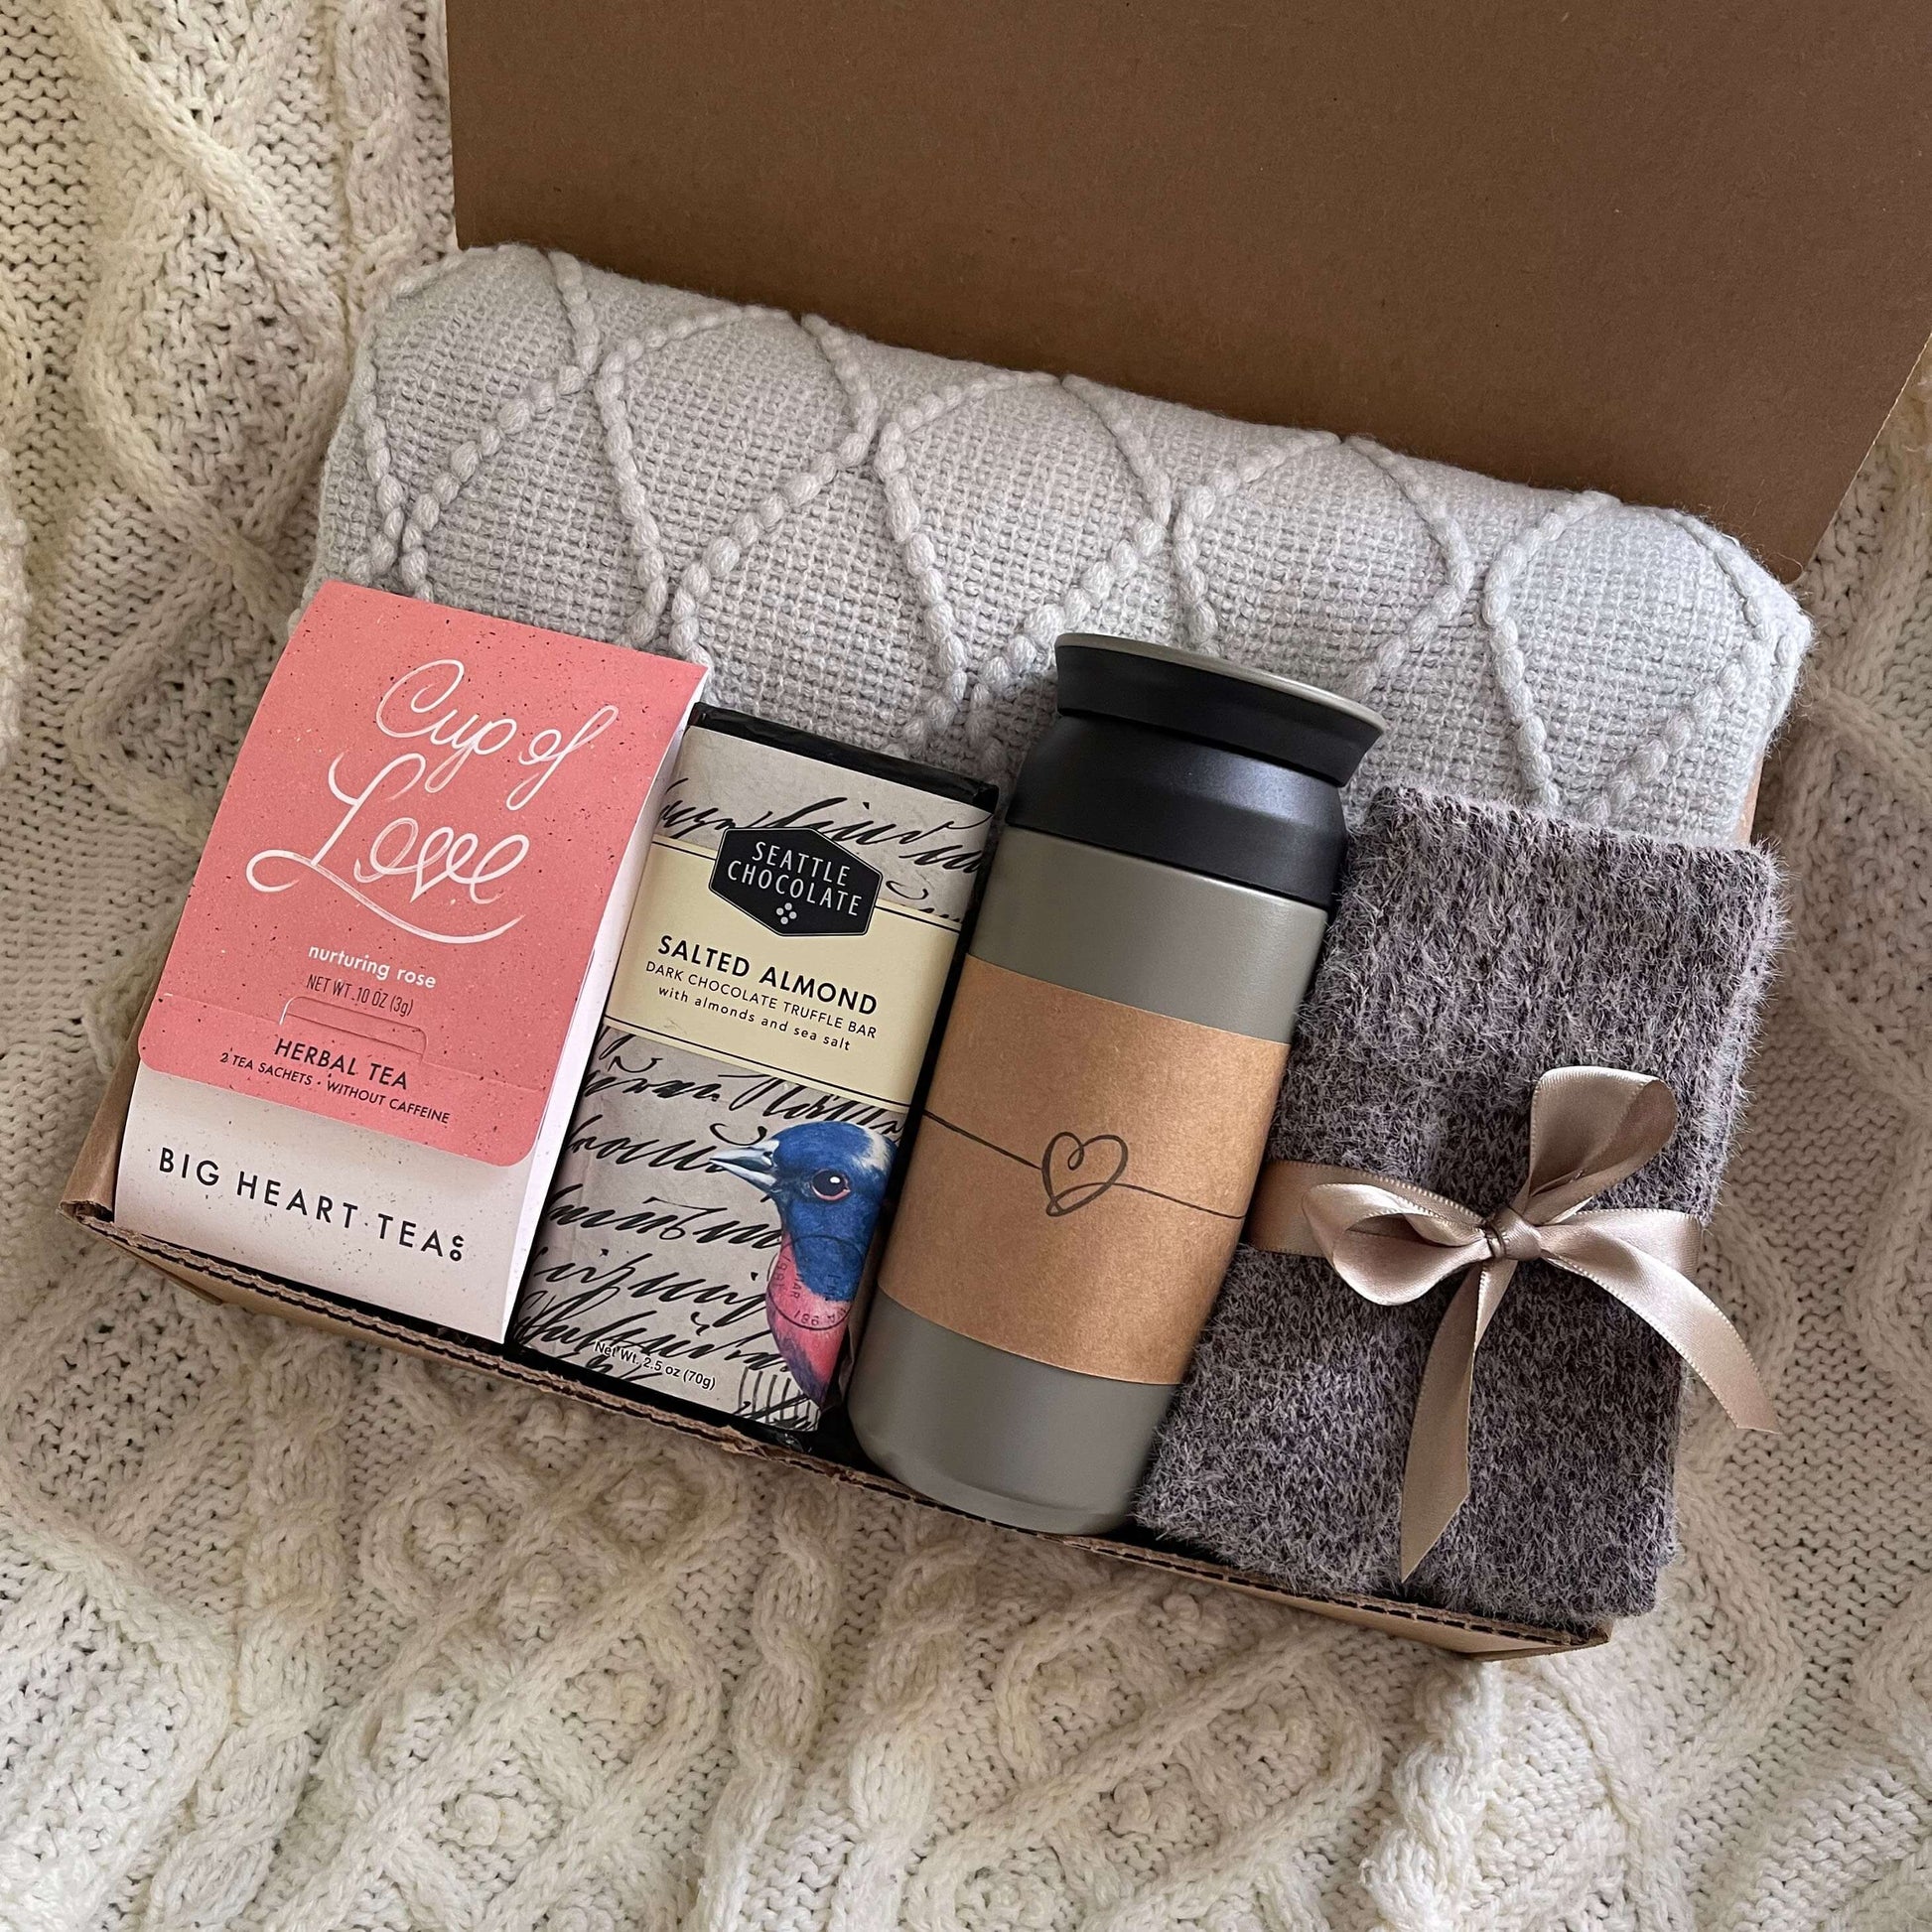 Holiday Gift Guide For Women 2020 – Tara Thueson